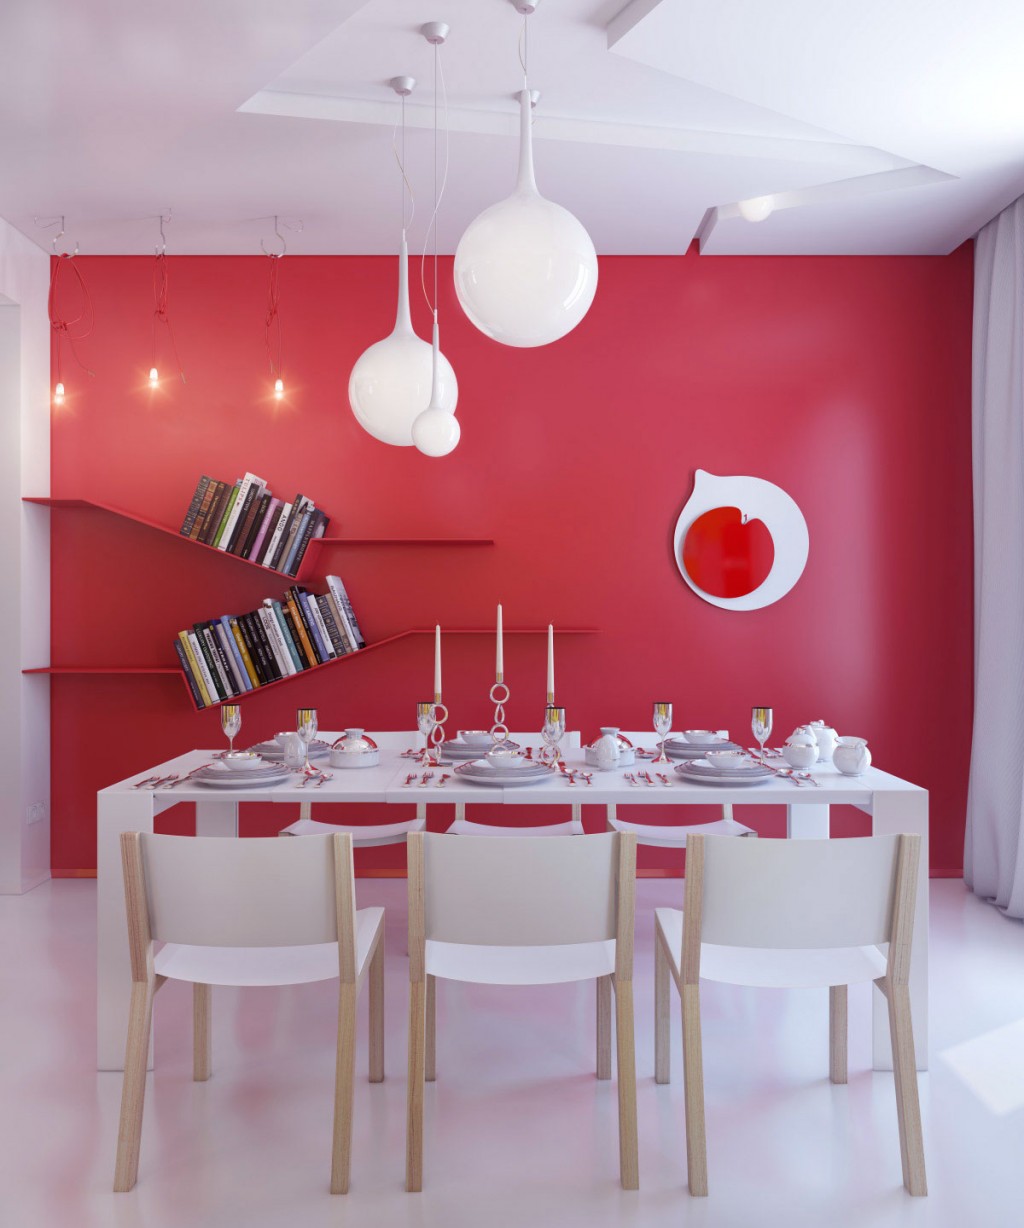 Modern Light Fixtures in White Red Dining Room